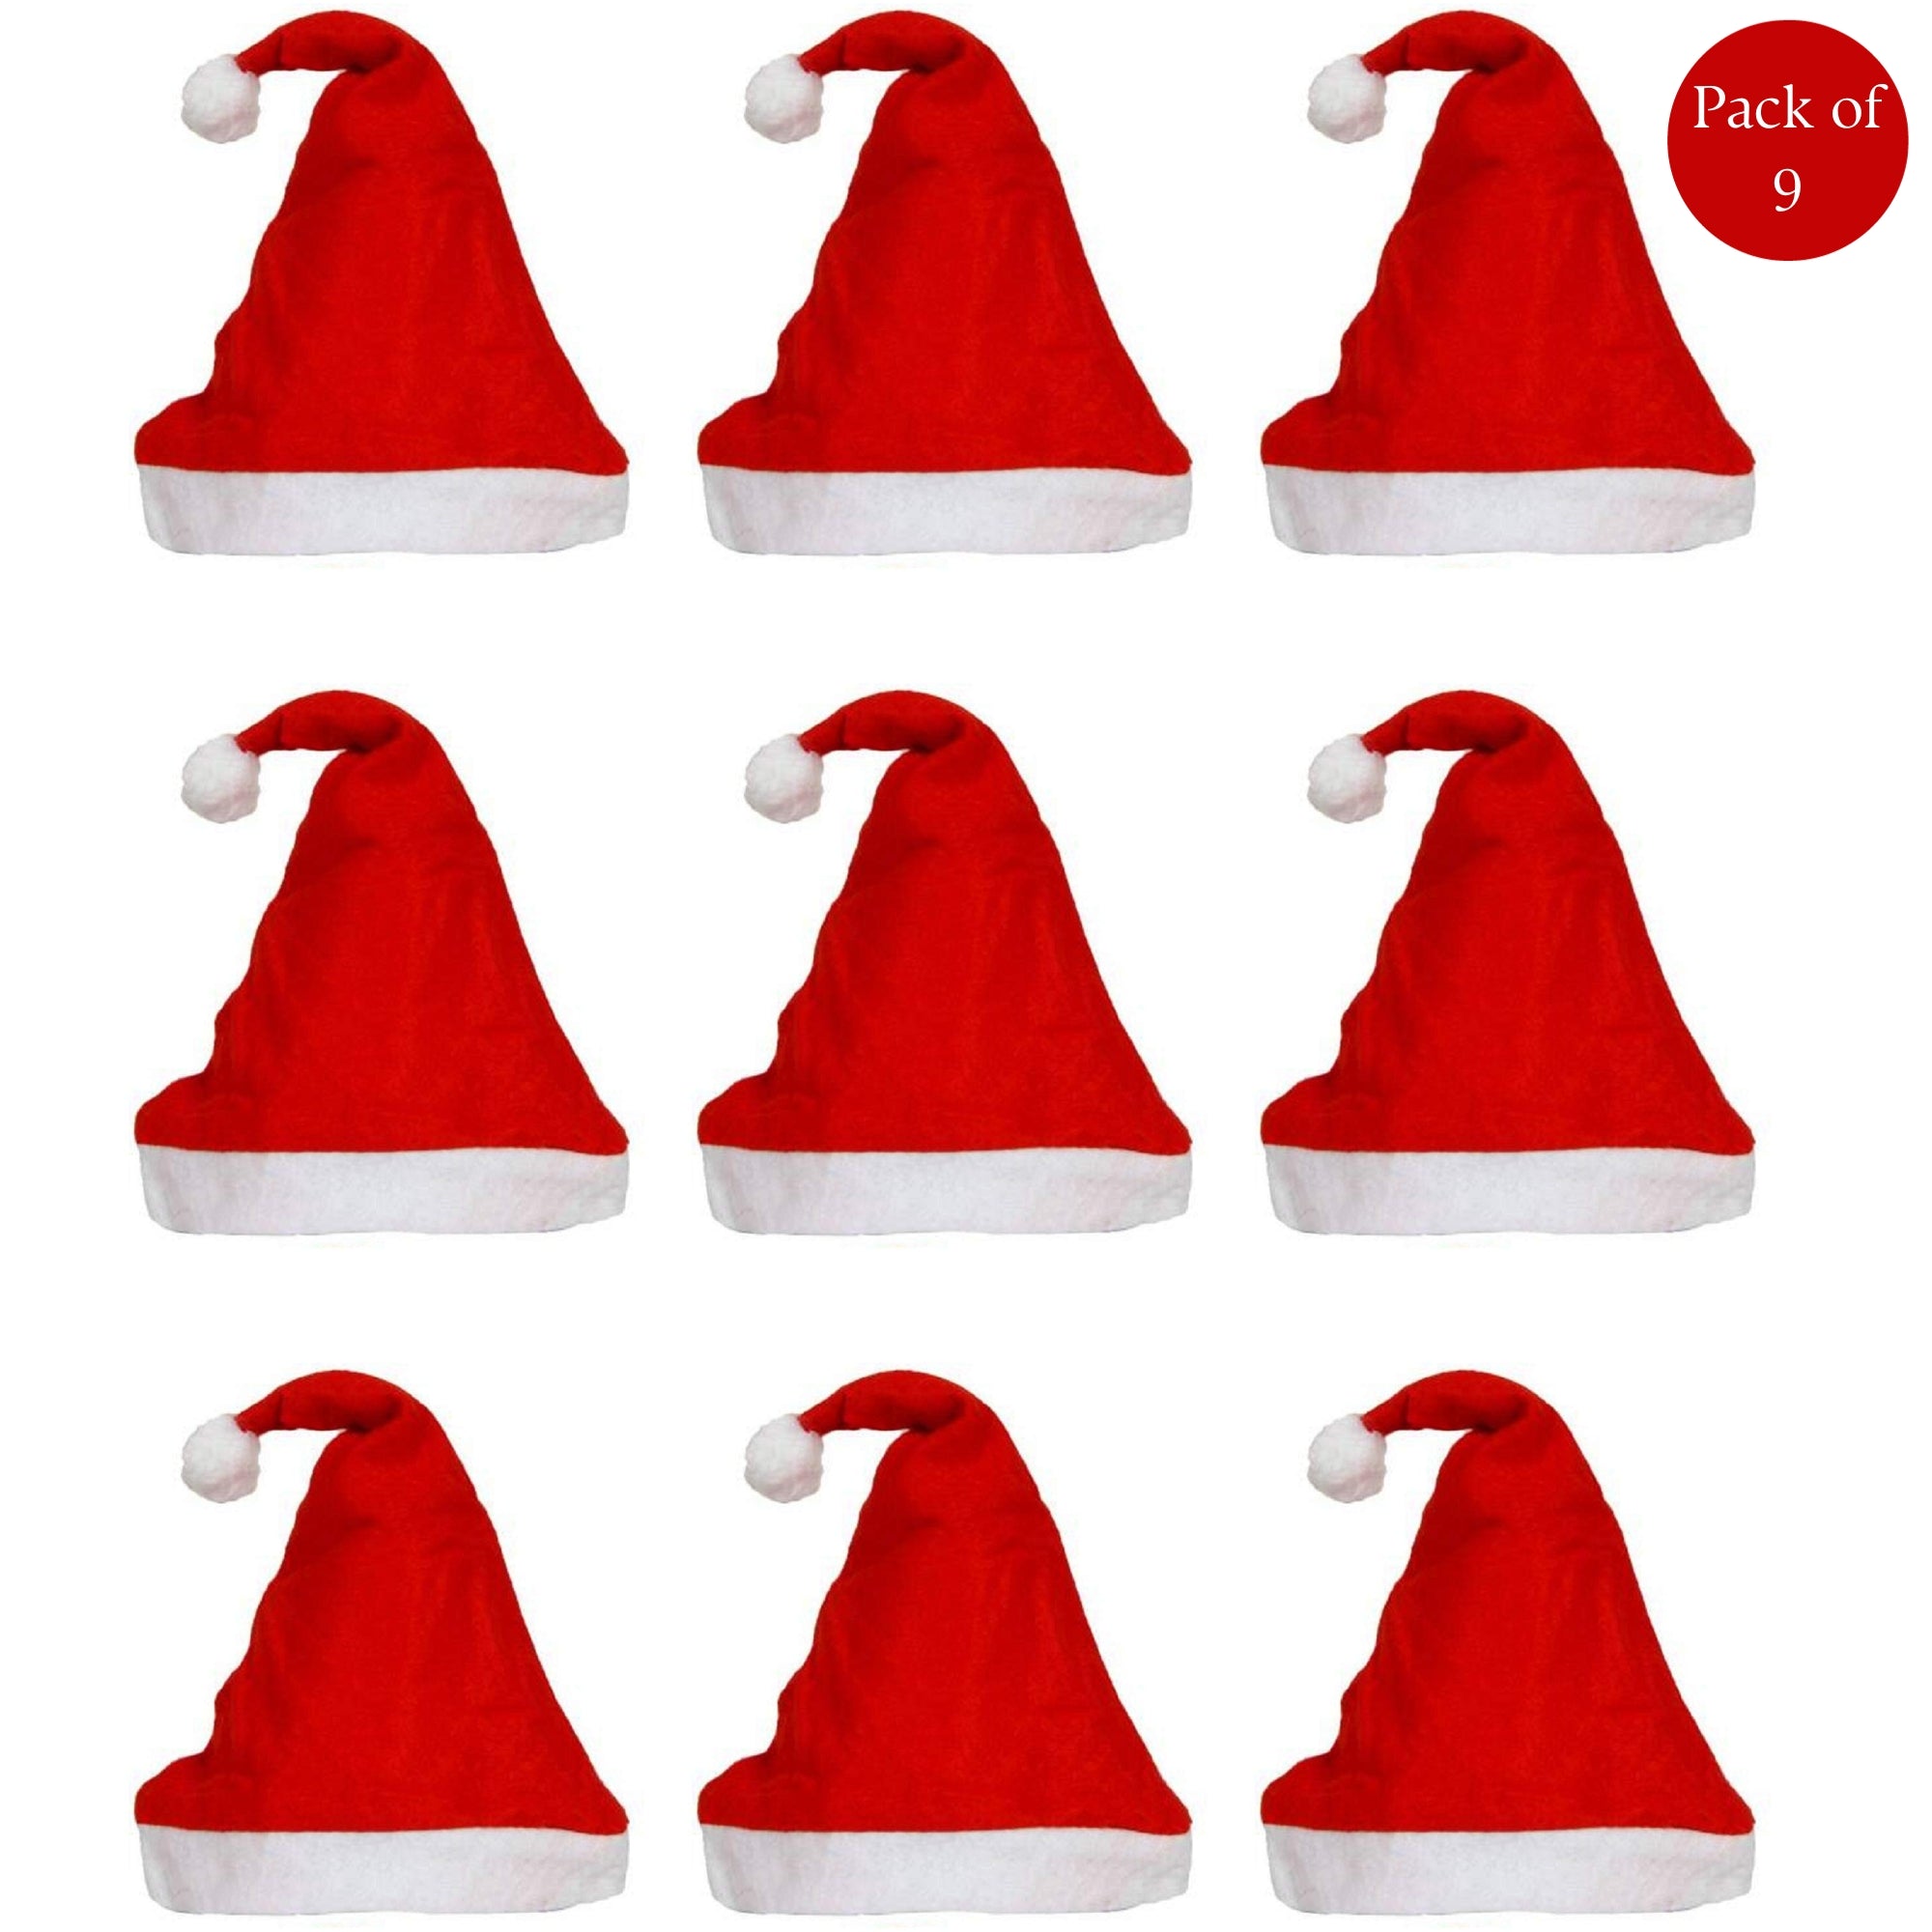 eCraftIndia Red and White Merry Christmas Hats, Santa Claus Caps for kids and Adults - Free Size XMAS Caps, Santa Claus Hats for Christmas, New Year, Festive Holiday Party (Set of 9) 1